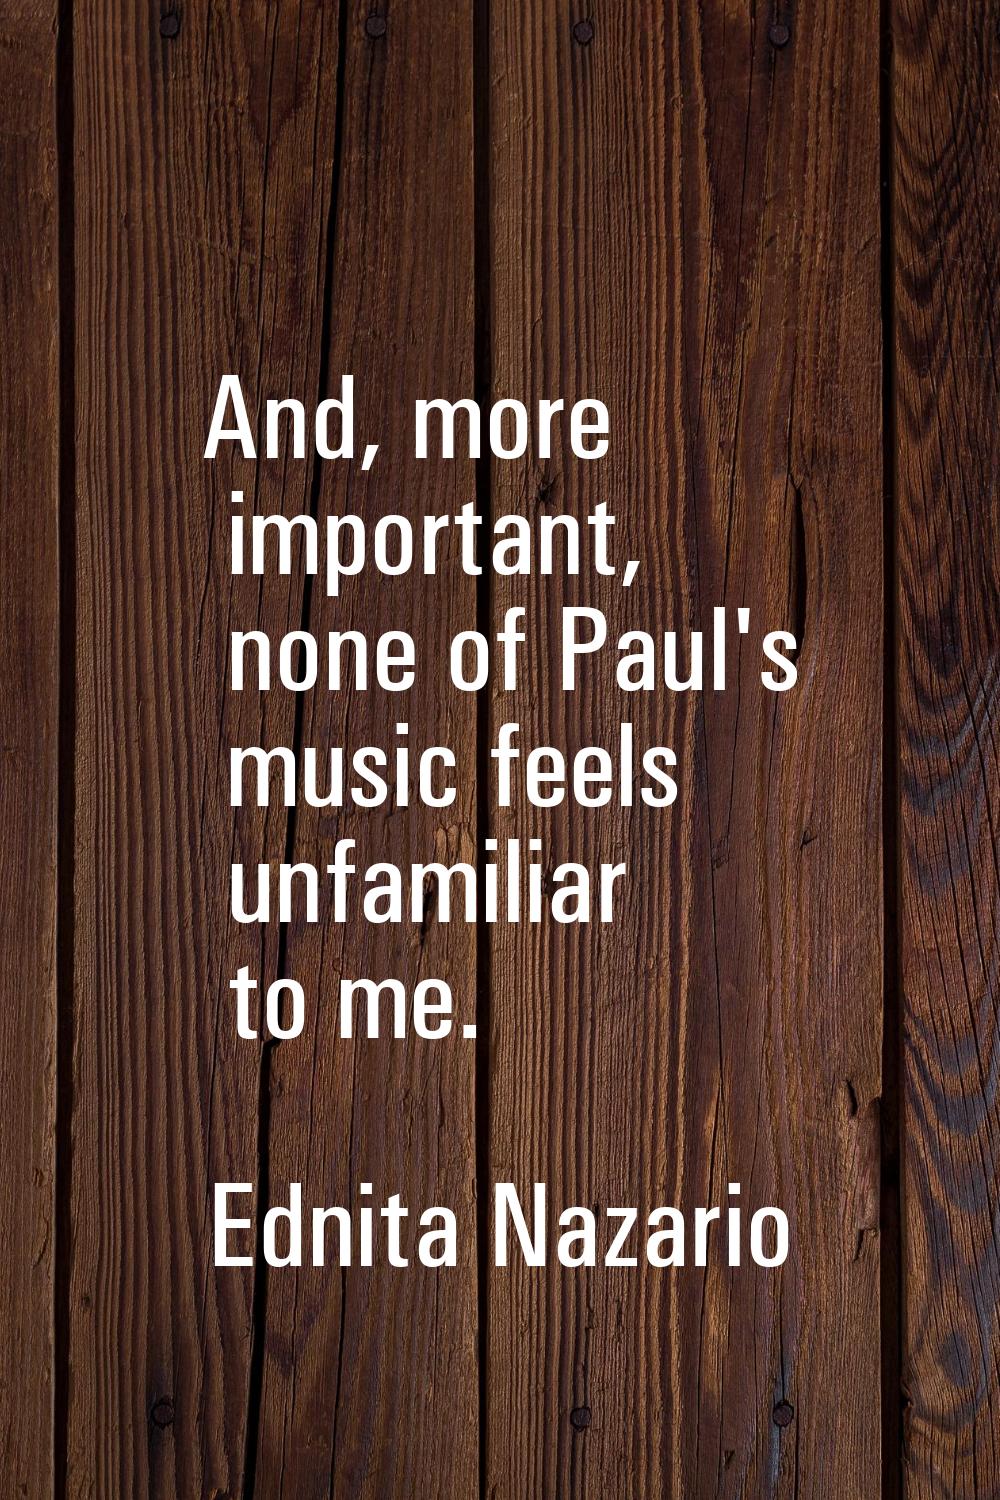 And, more important, none of Paul's music feels unfamiliar to me.